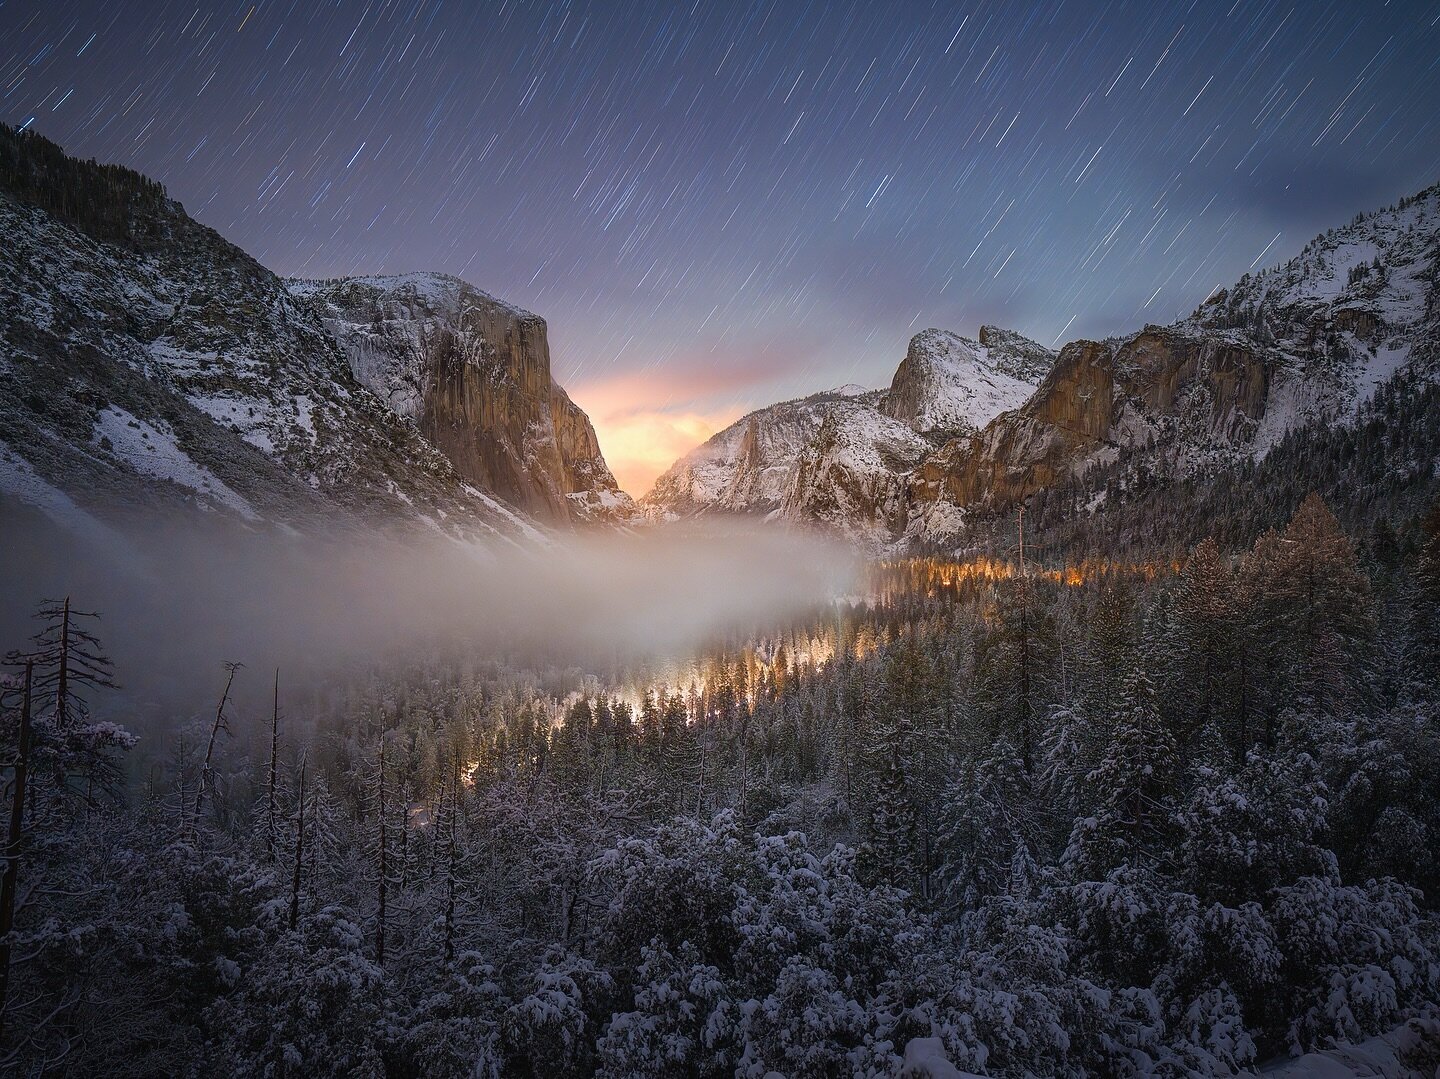 Tunnel View at Midnight 🏞️🌨️❄️🔥✨

Winter storm in Yosemite is my cue to drive in while everyone tries to get out of it. Snow accumulation on trees and the valley floor doesn&rsquo;t last more than a few hours after the storm breaks. 

Be safe out 